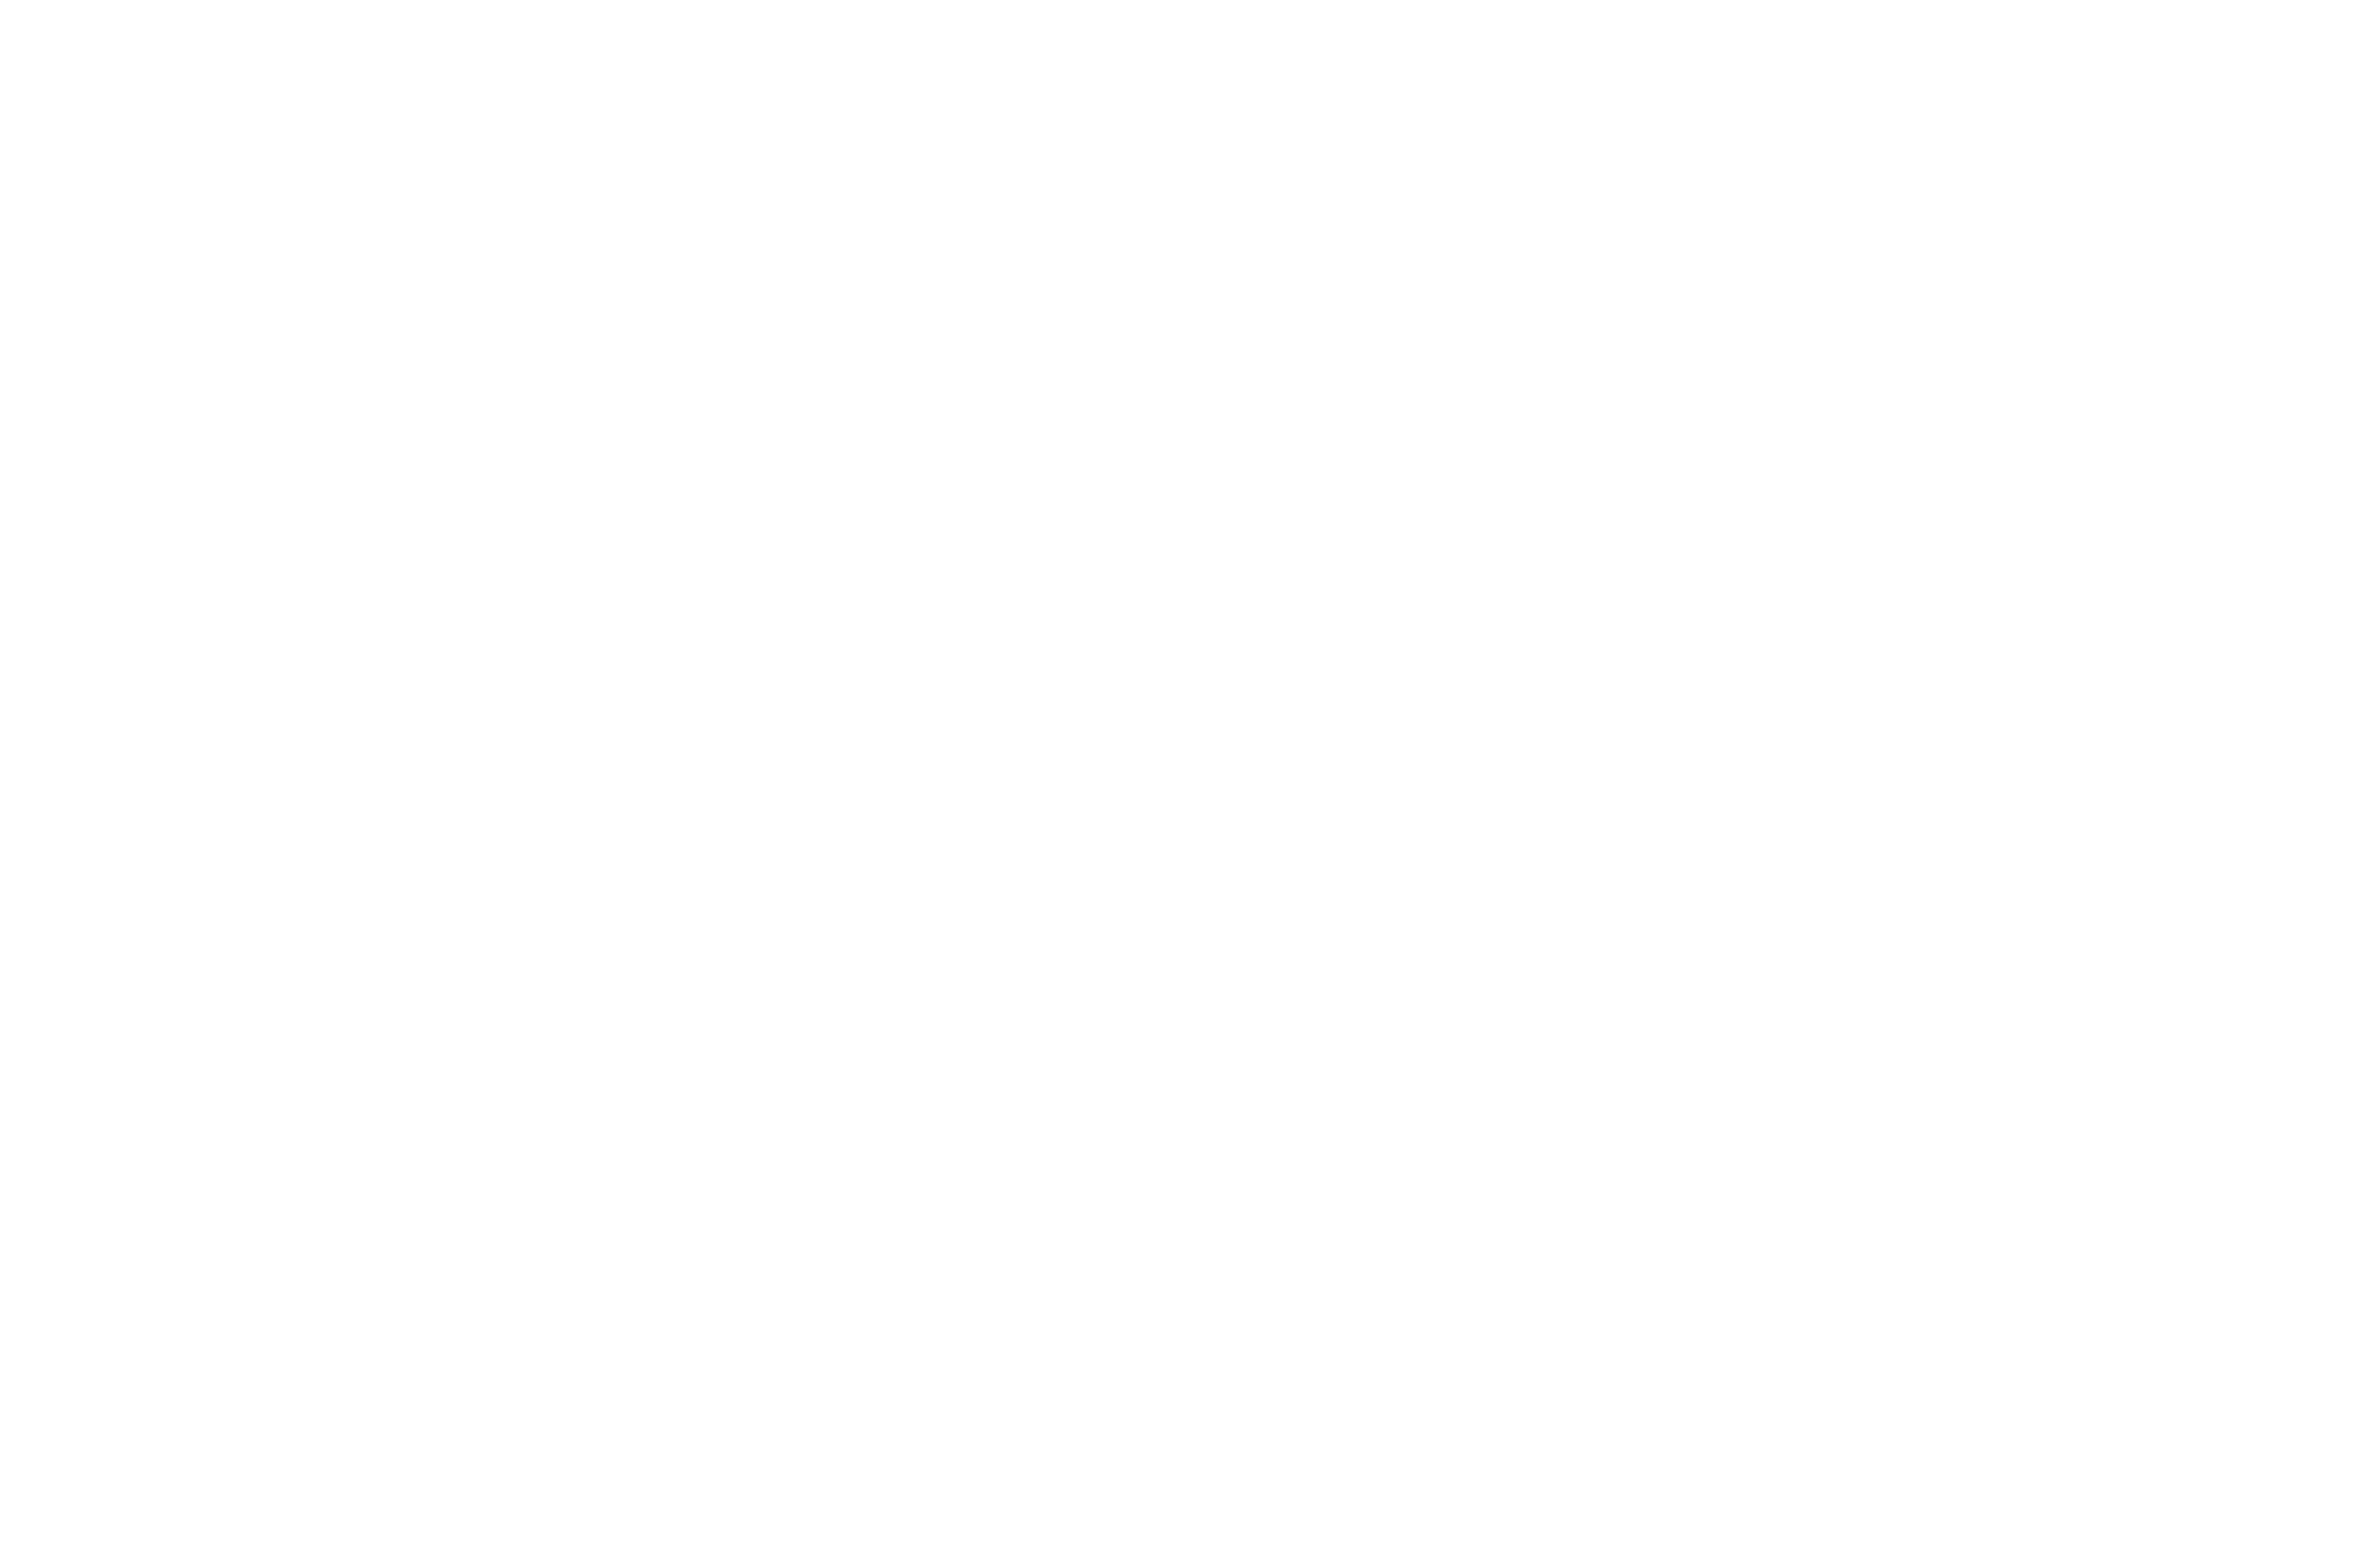 /globalassets/water-resources-north/wren_logo_updated_3_white.png